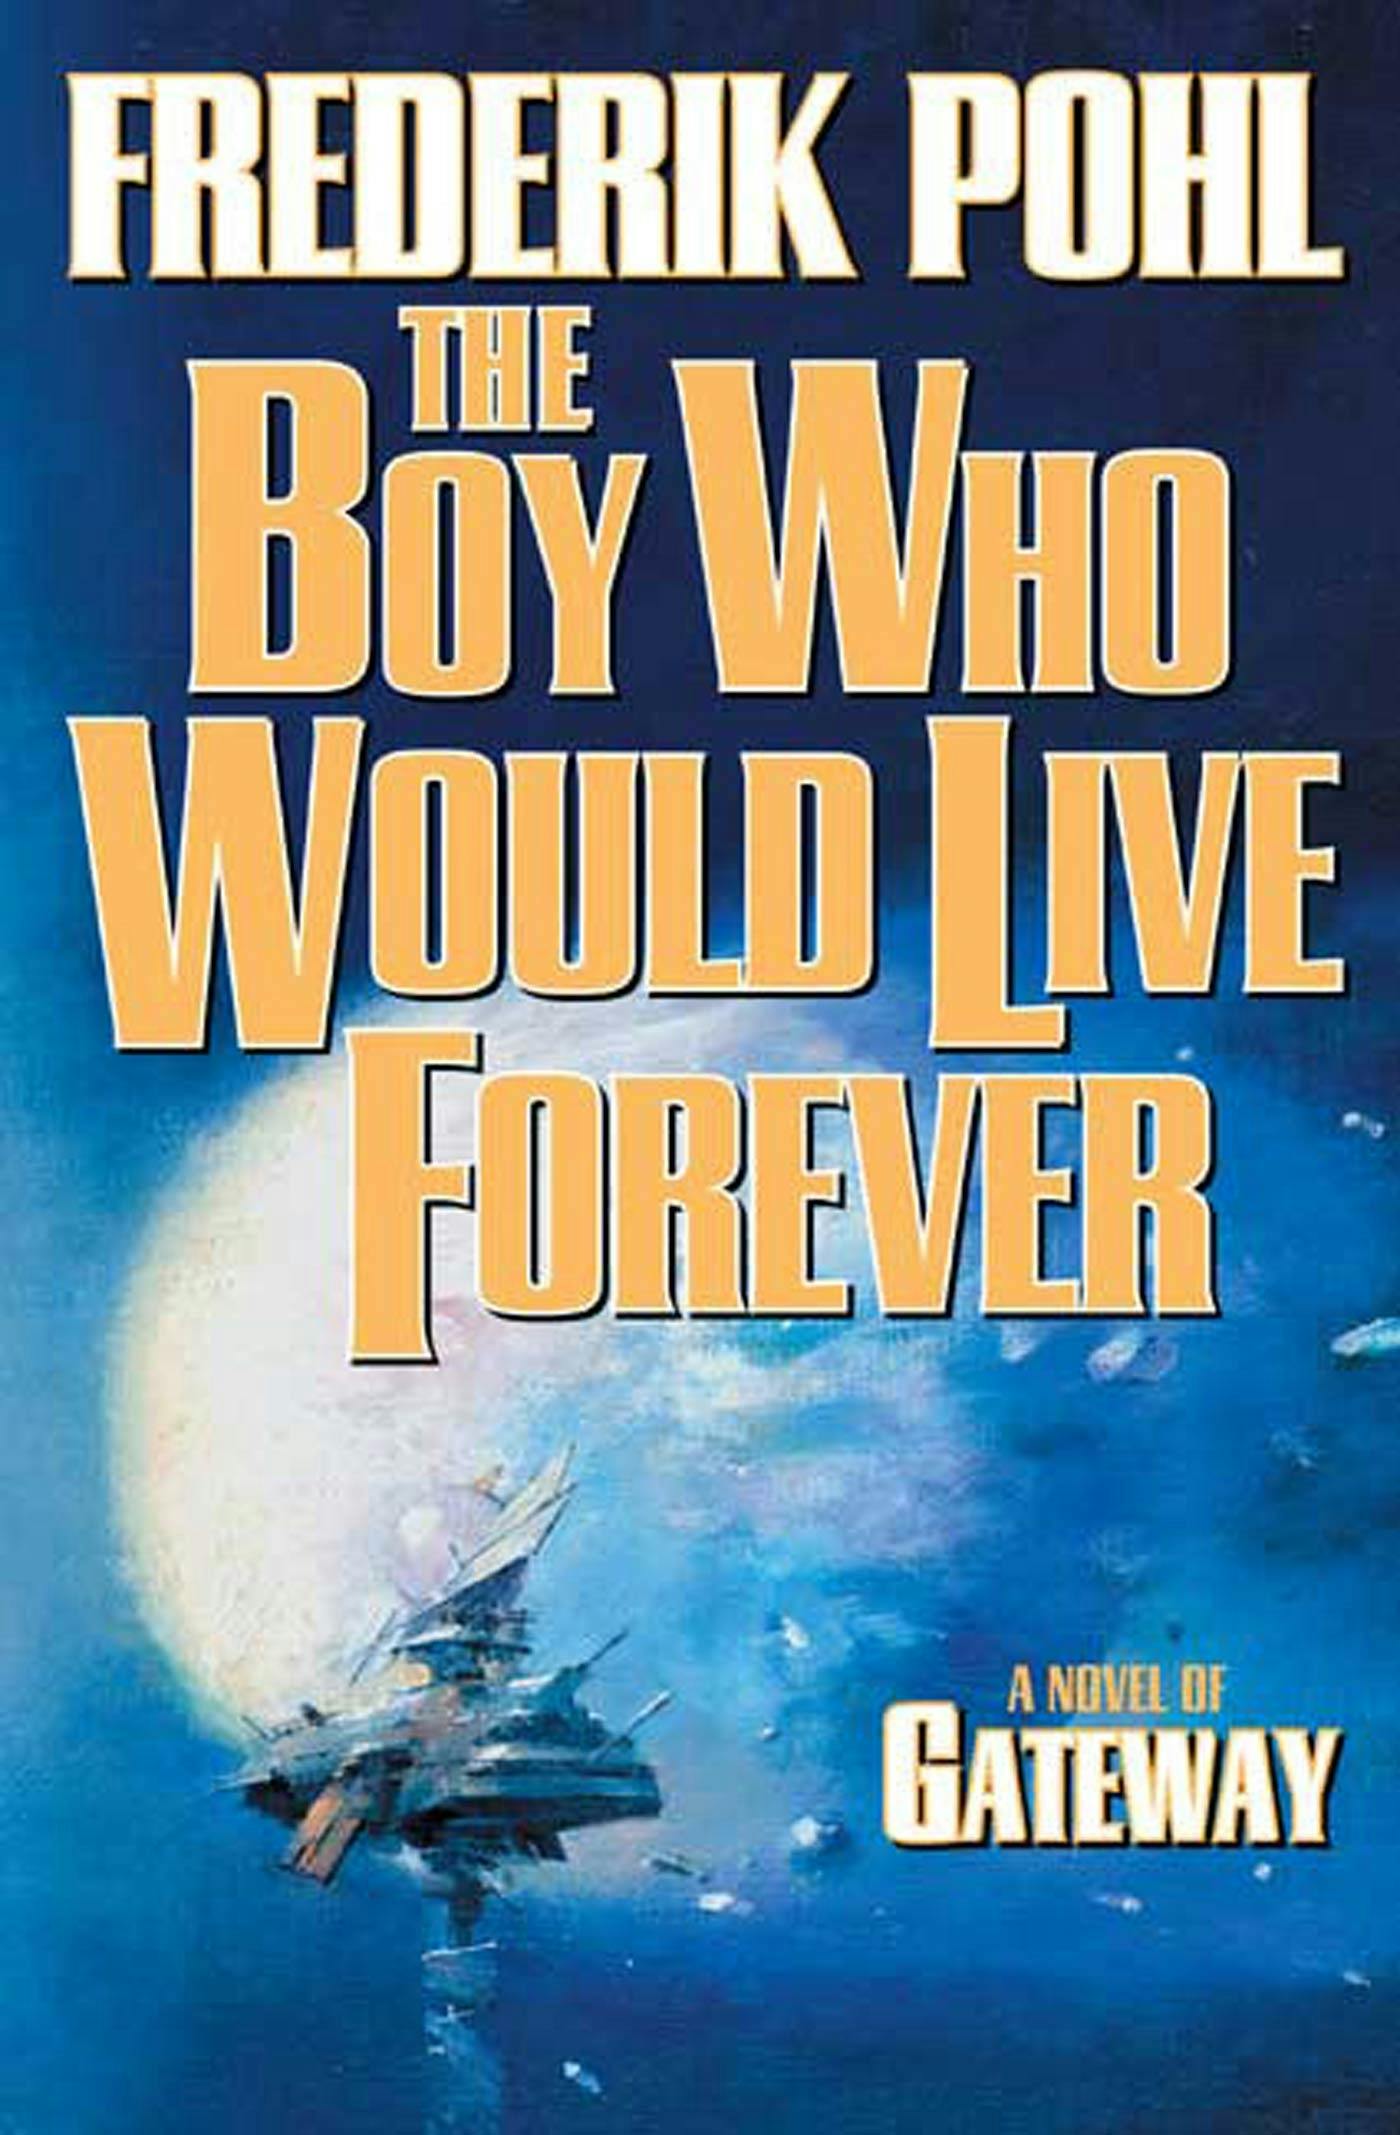 Cover for the book titled as: The Boy Who Would Live Forever